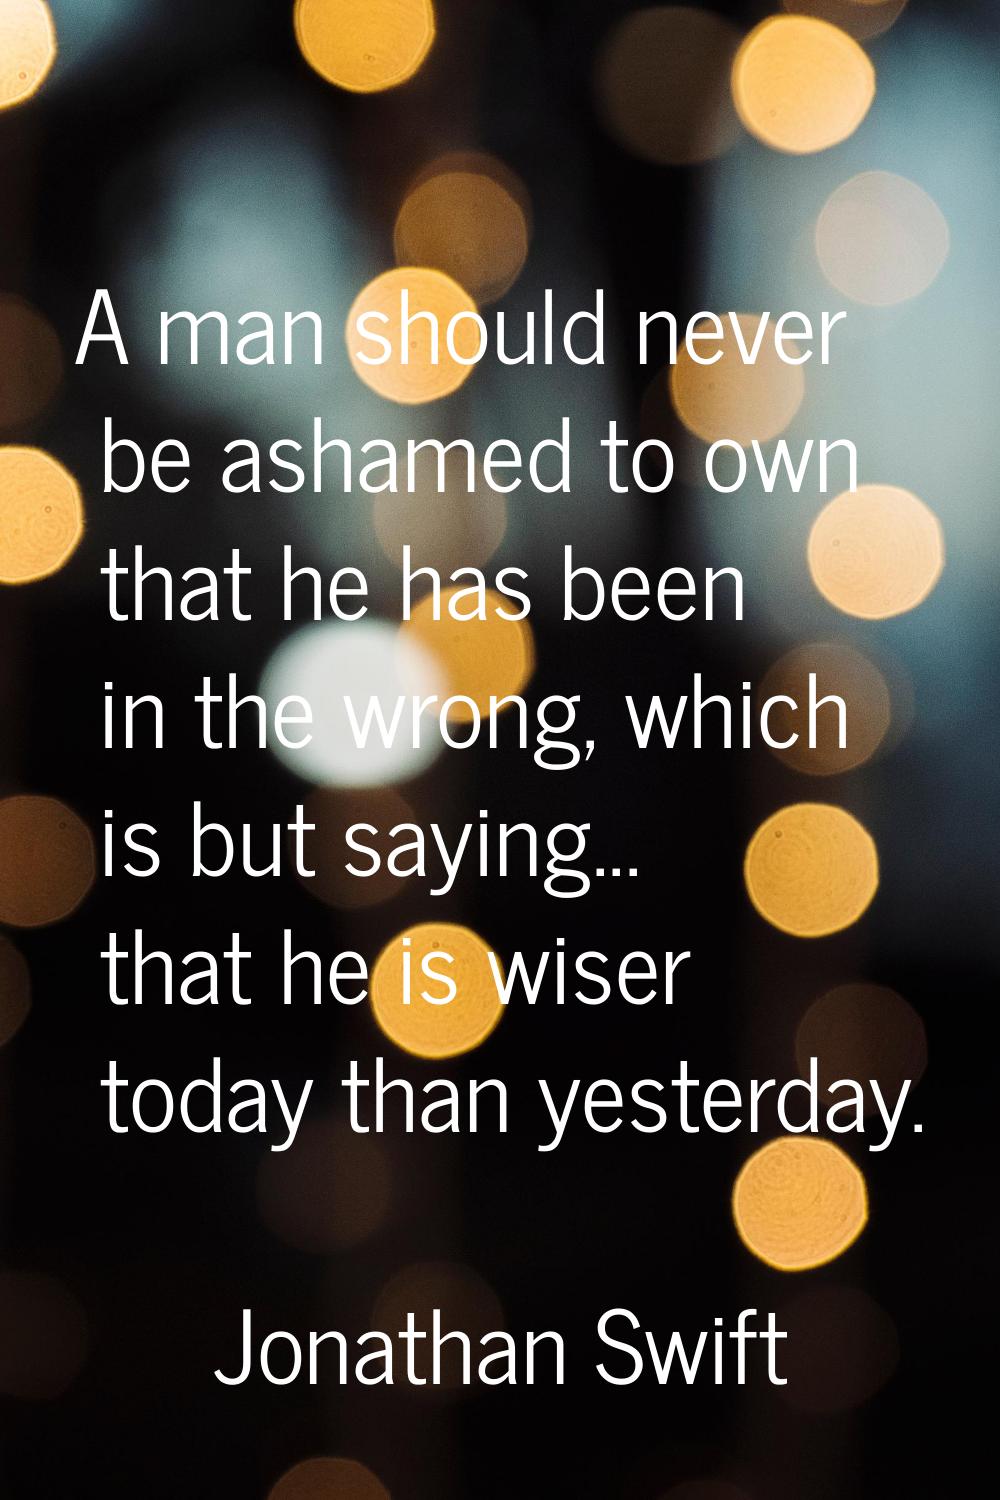 A man should never be ashamed to own that he has been in the wrong, which is but saying... that he 